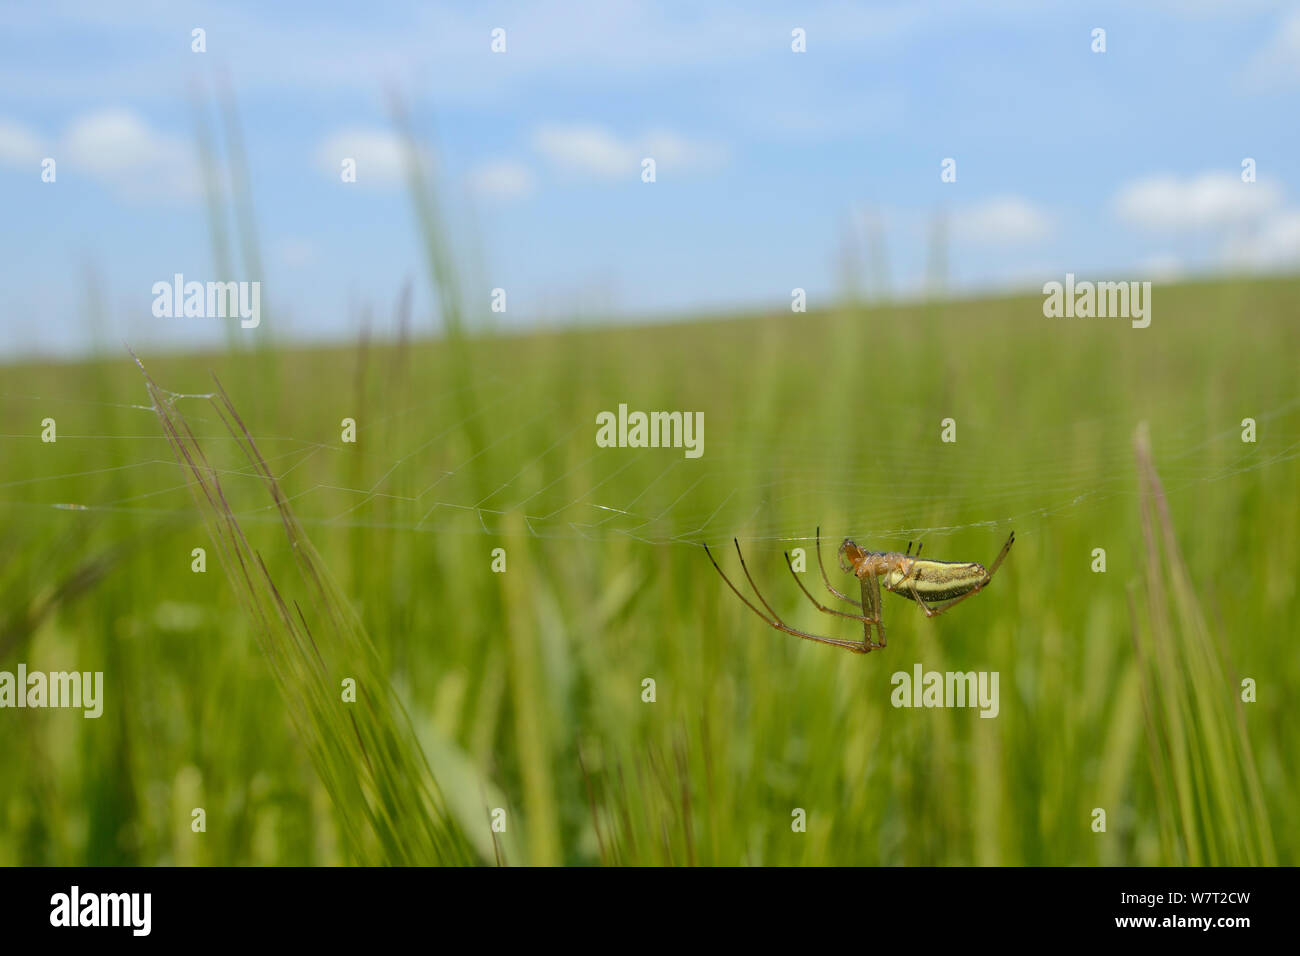 Long-jawed orbweaver / Common Stretch spider (Tetragnatha extensa) hanging upside down on its web in a Barley crop, Marlborough Downs, Wiltshire, UK, July. Stock Photo